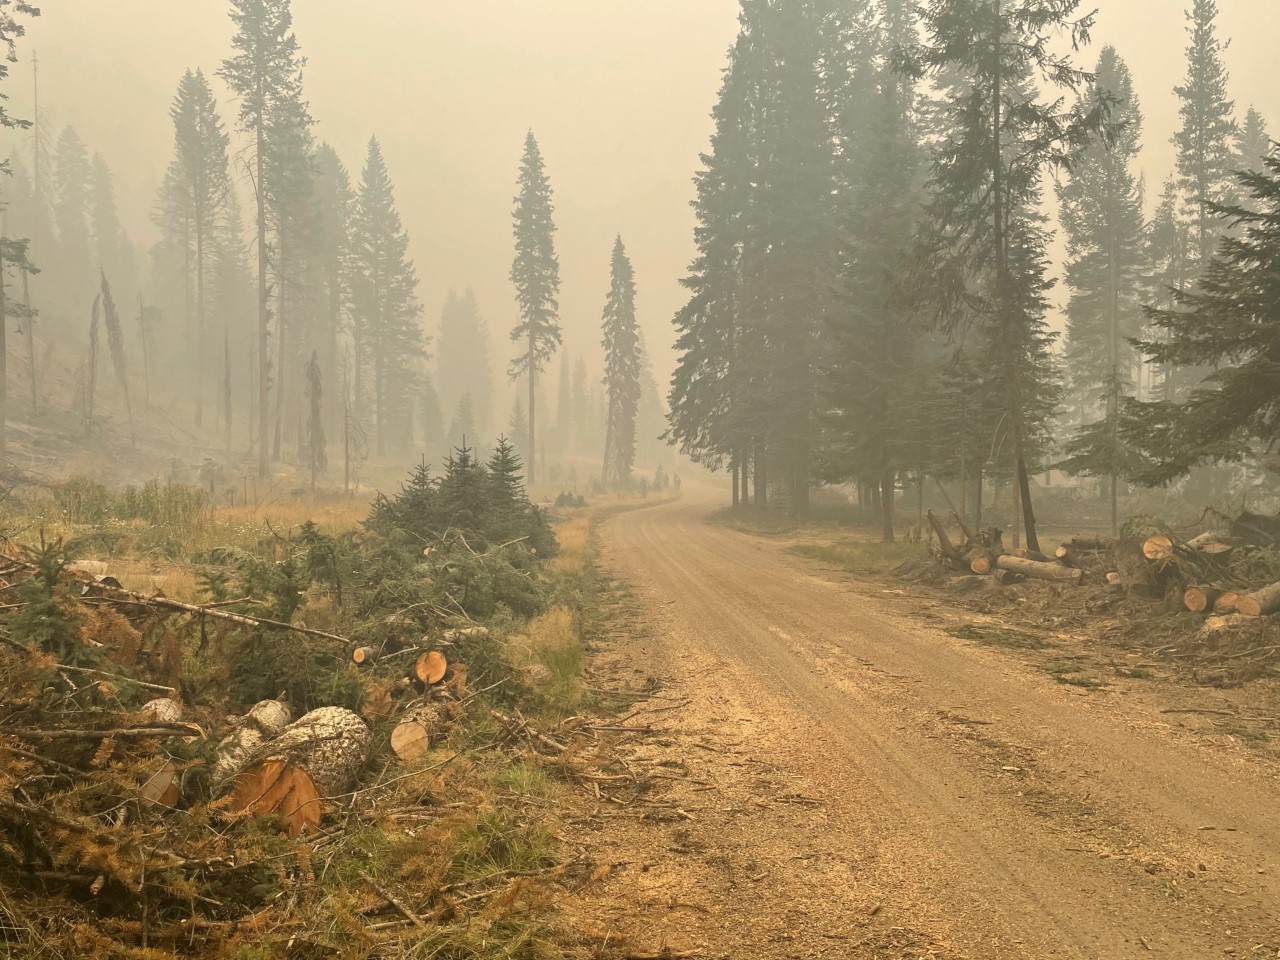 A smokey haze hangs above a gravel road with chopped logs on either side and evergreen trees.